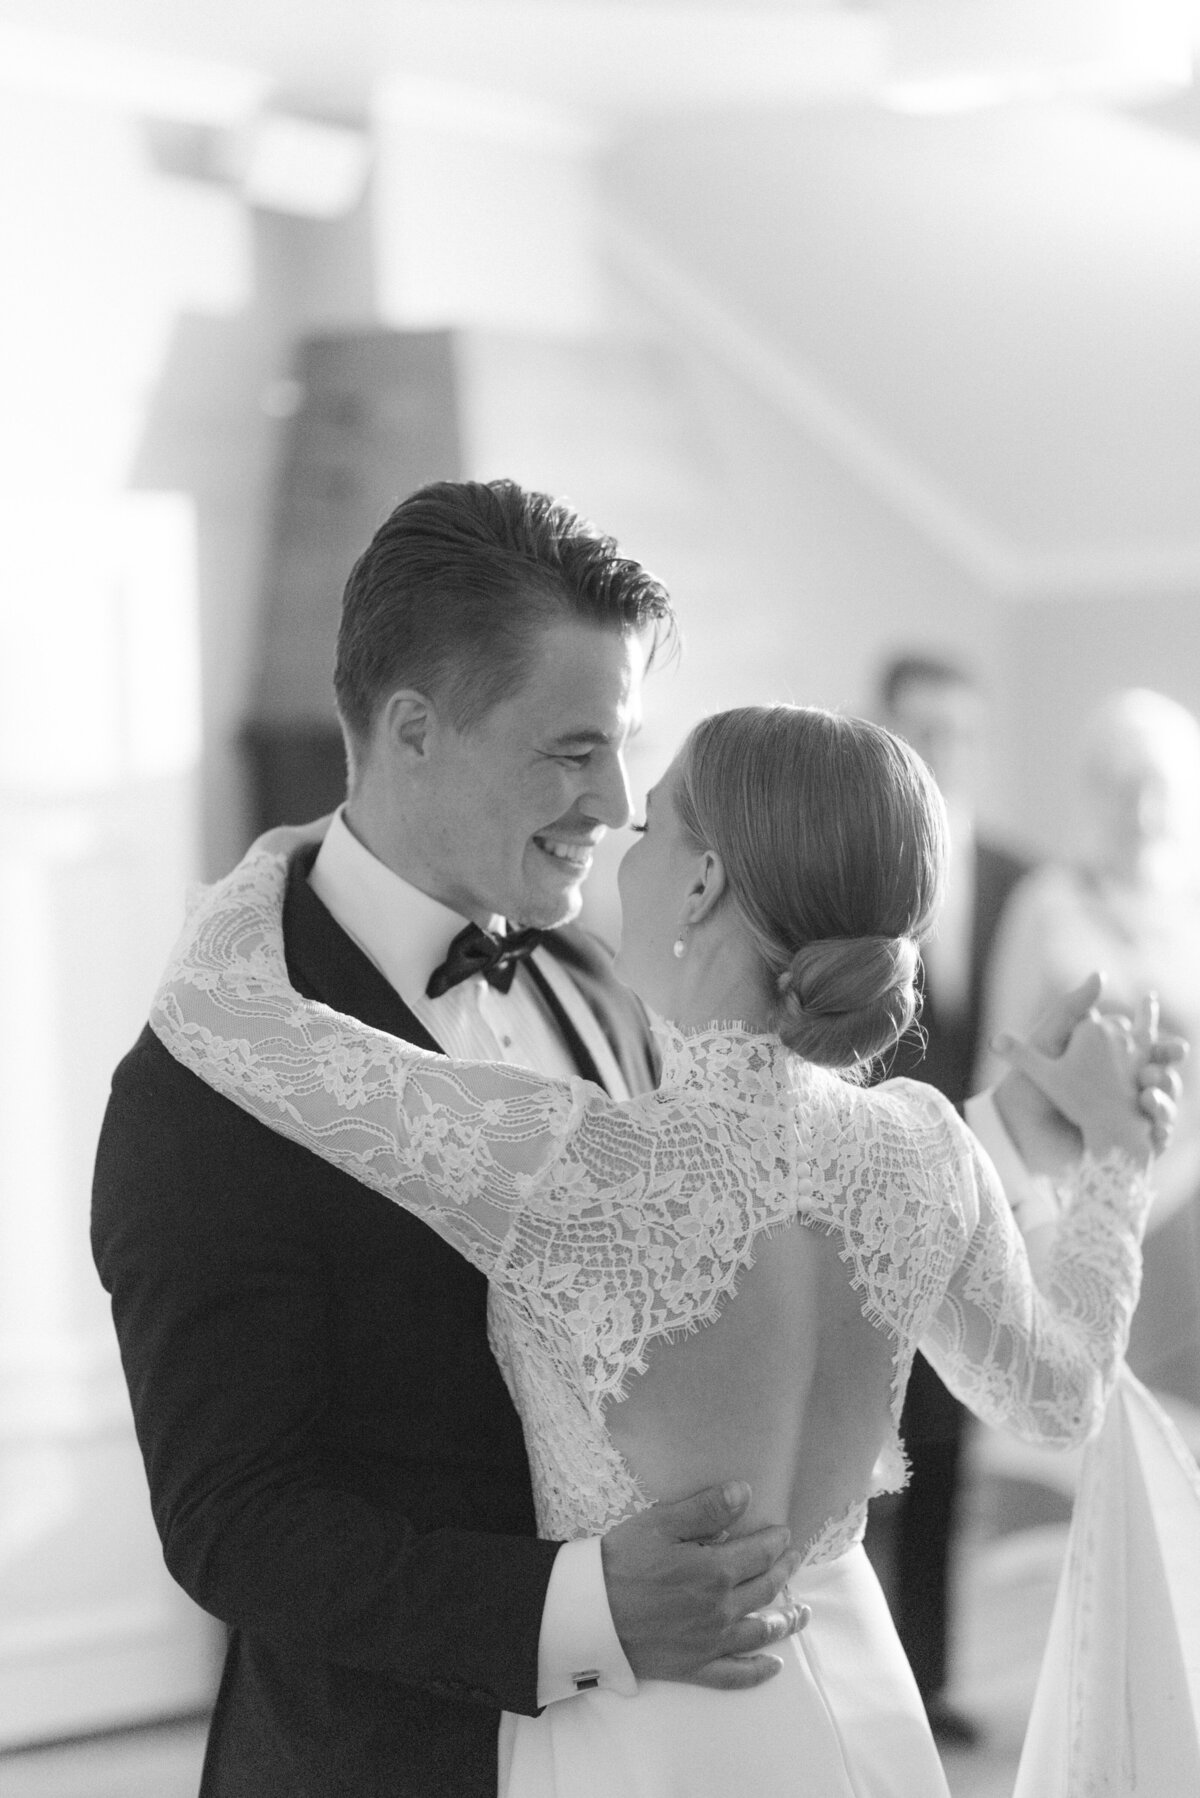 Documentary wedding photo of couple dancing their first dance in Airisniemi manor in Turku. Romantic moments captured by wedding photographer Hannika Gabrielsson.